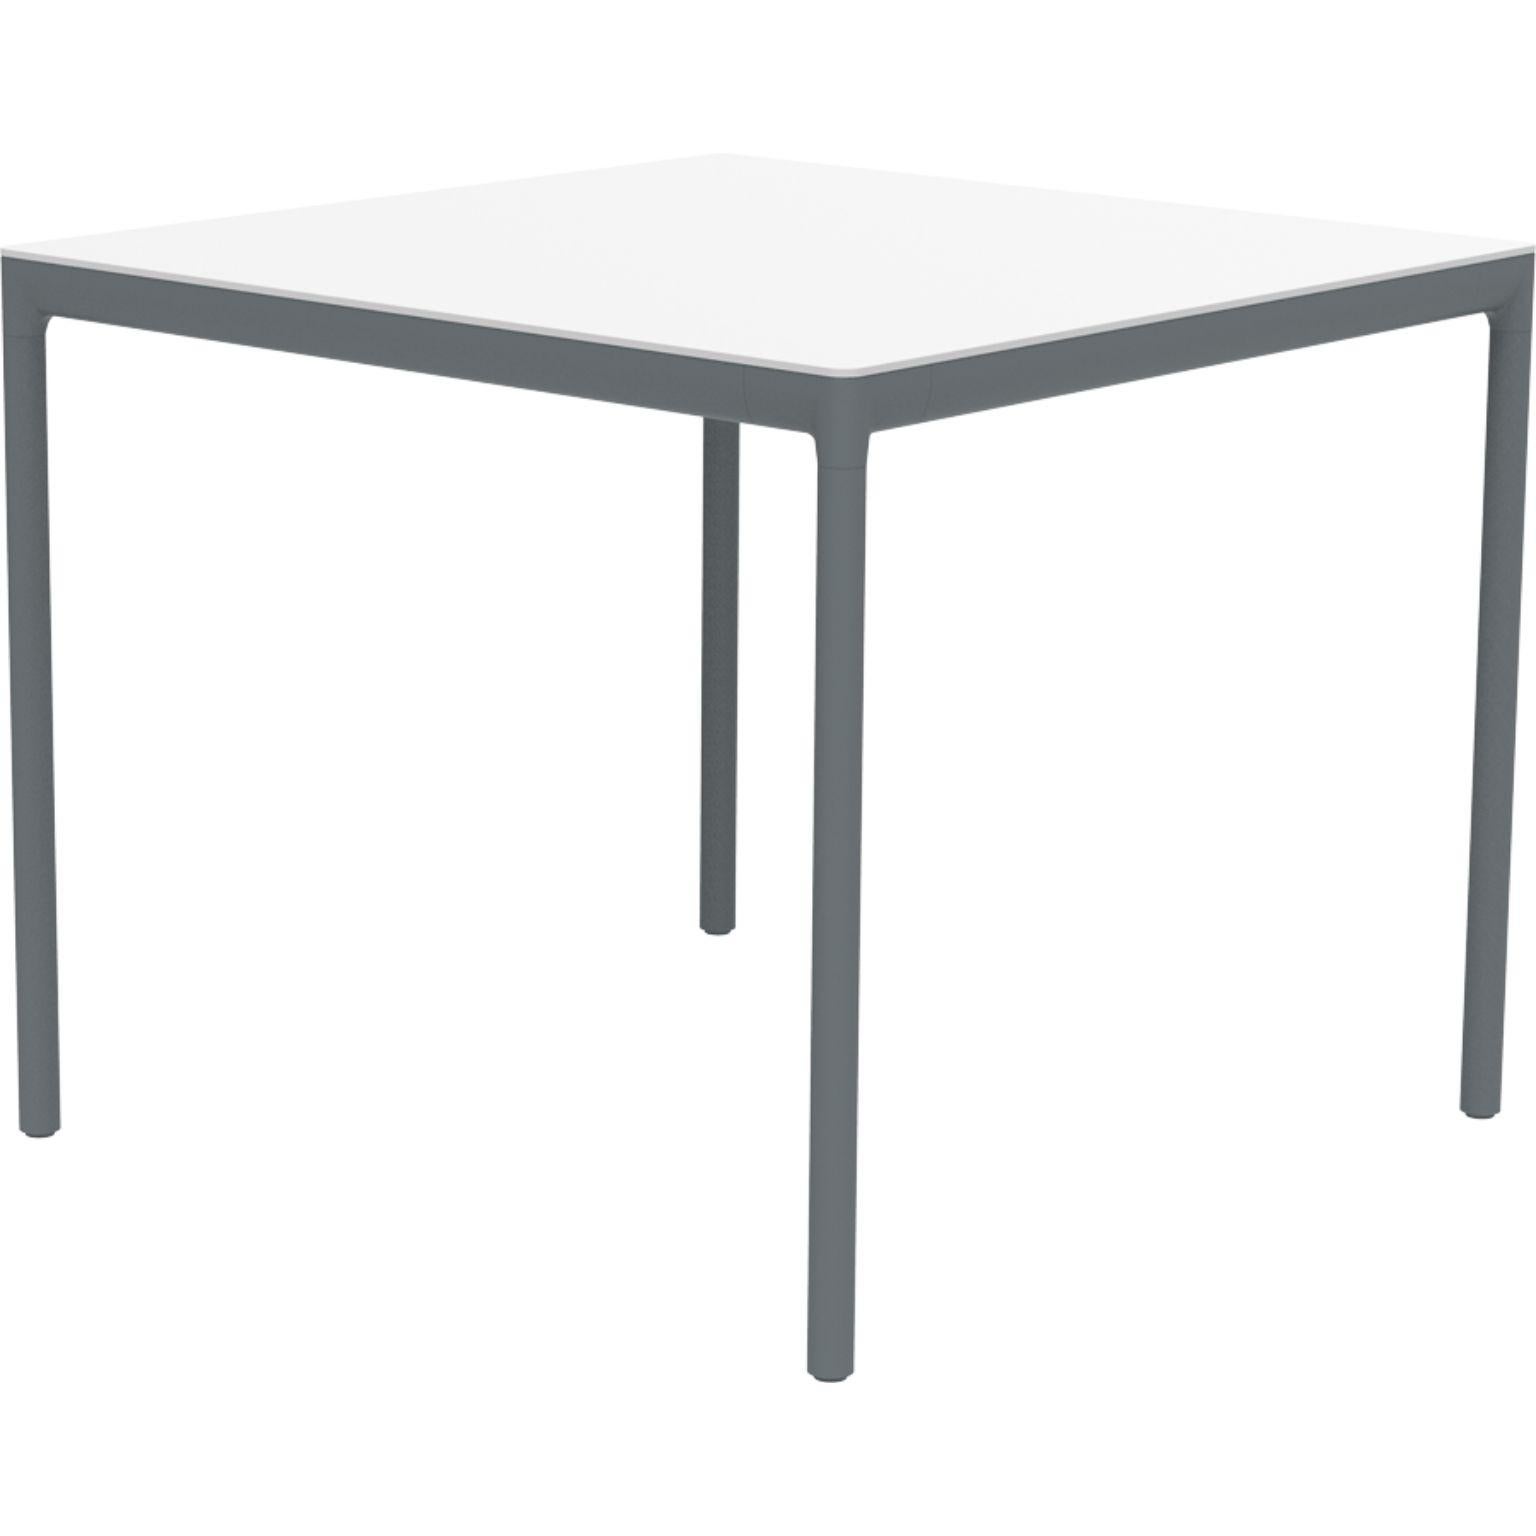 Ribbons grey 90 table by MOWEE
Dimensions: D90 x W90 x H75 cm.
Material: Aluminium and HPL top.
Weight: 16 kg.
Also available in different colors and finishes. (HPL Black Edge or Neolith top).

An unmistakable collection for its beauty and